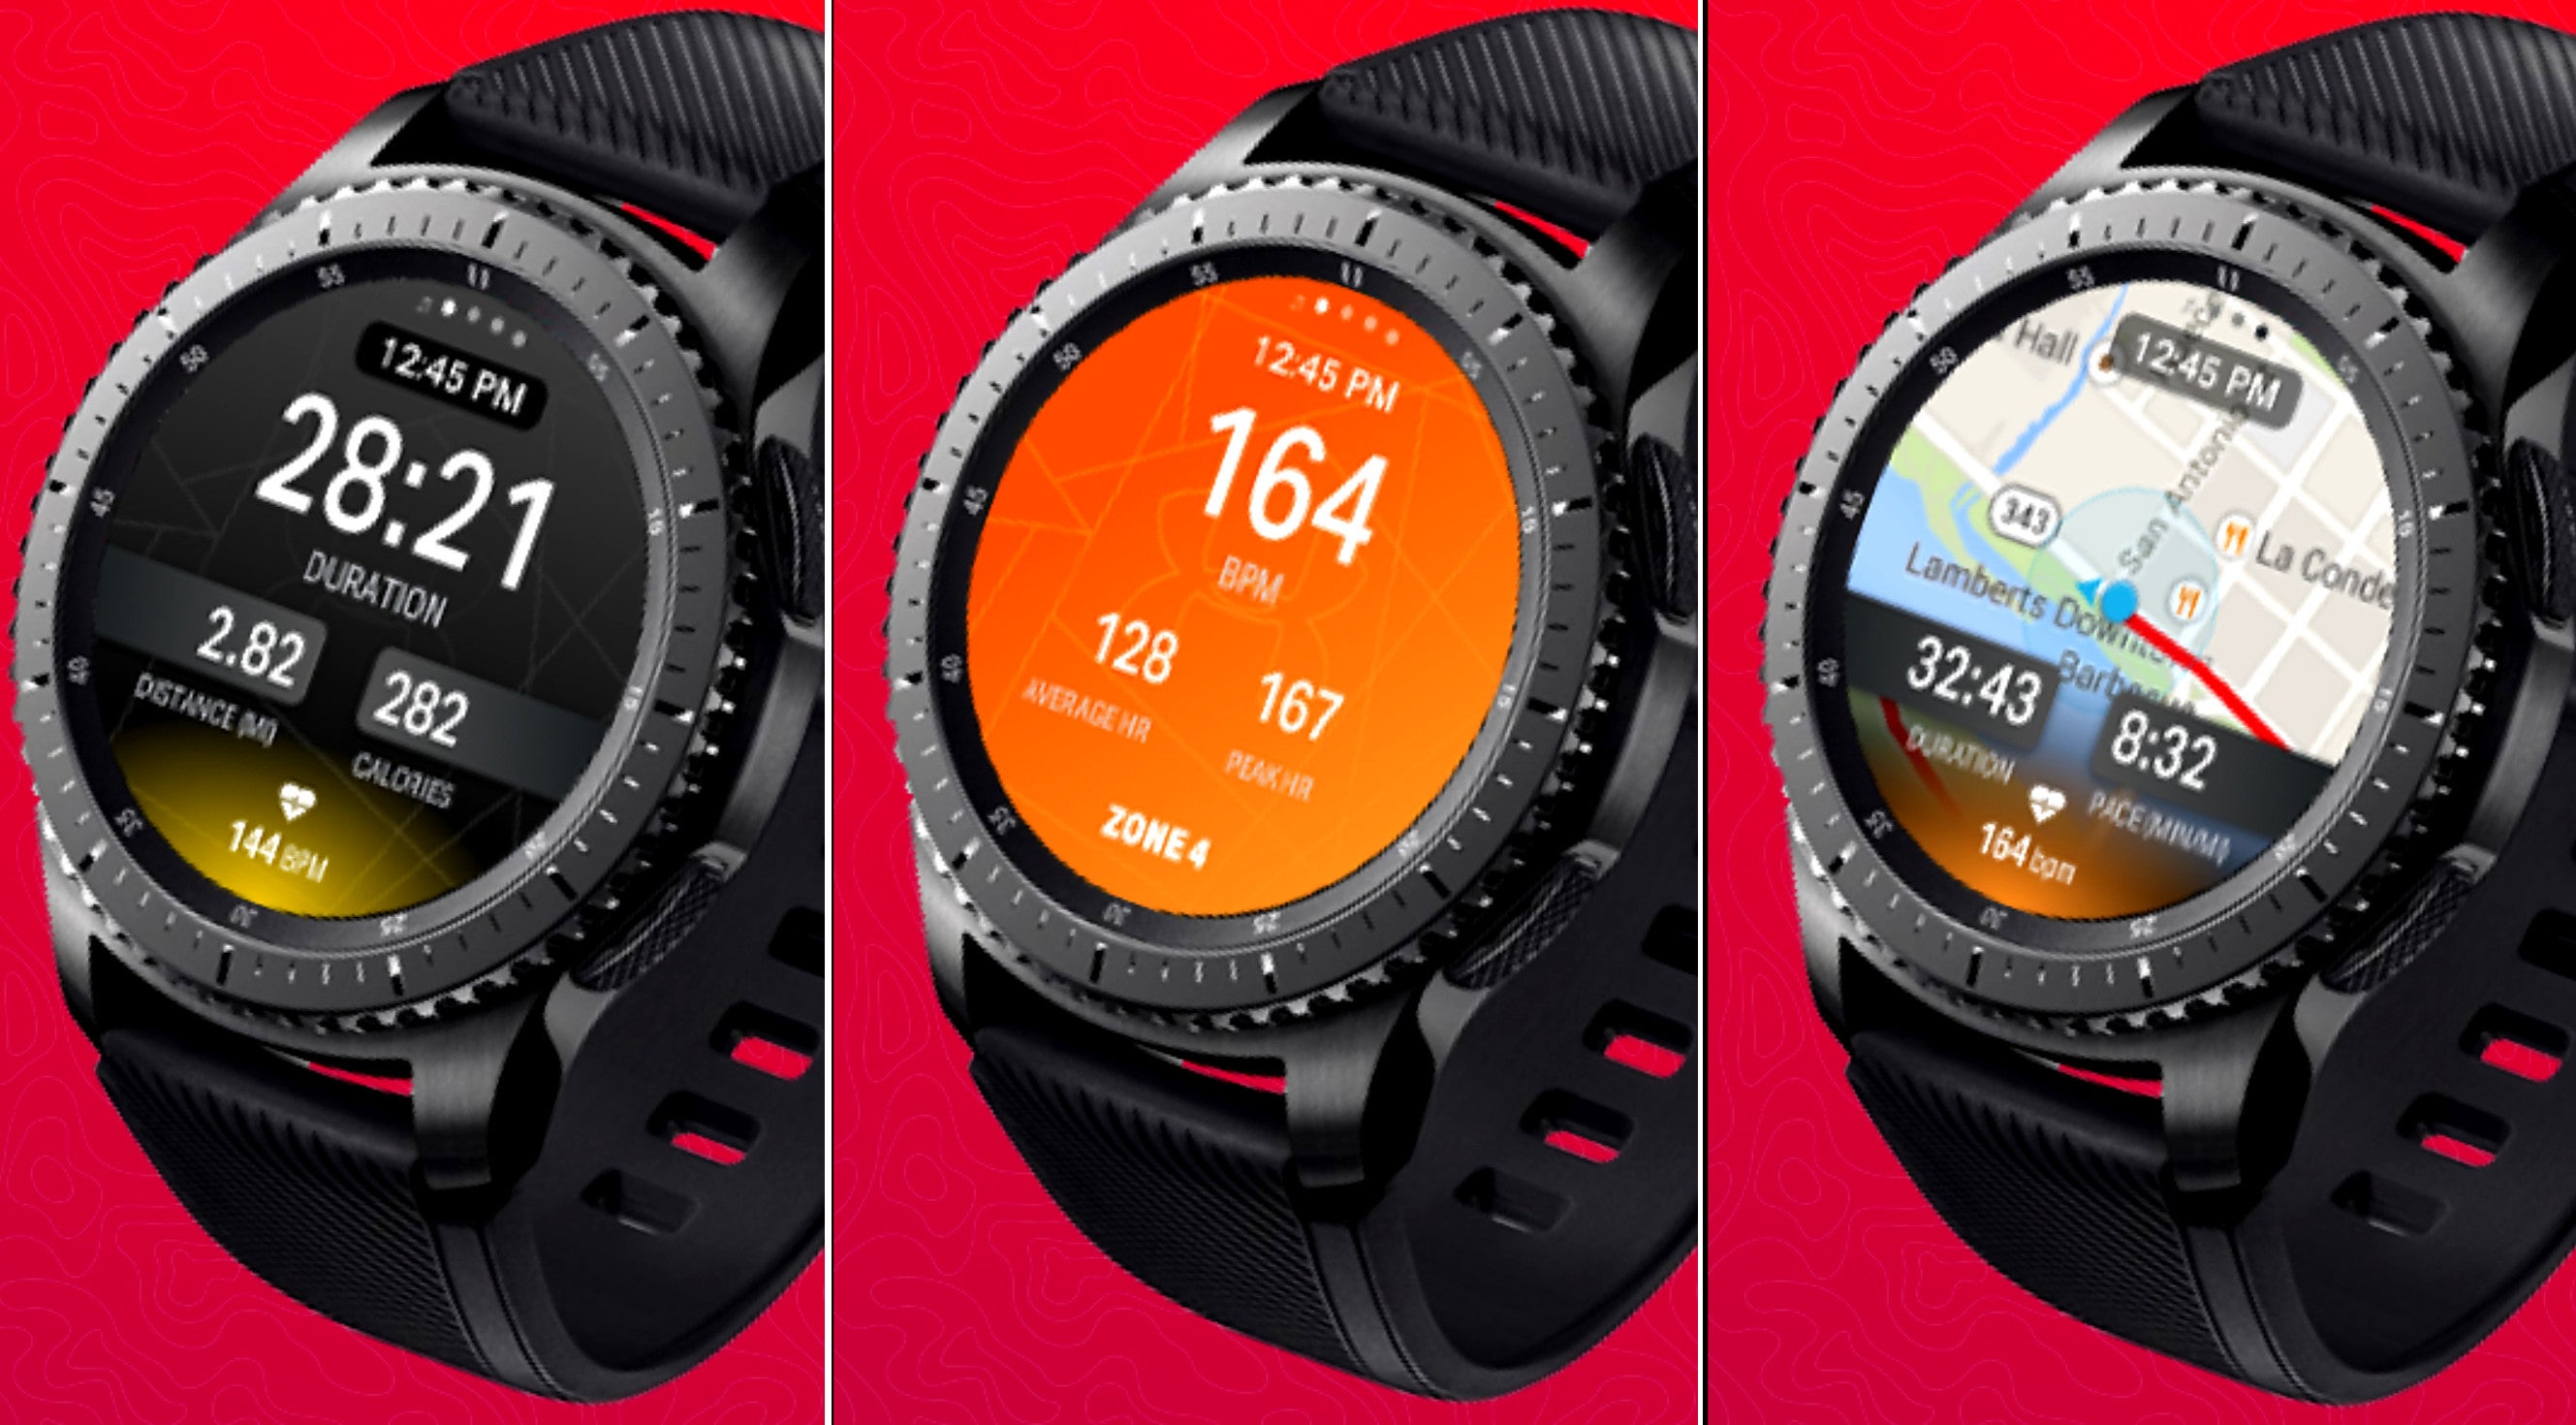 The best health and fitness apps for your Samsung Gear S3 and Sport watch